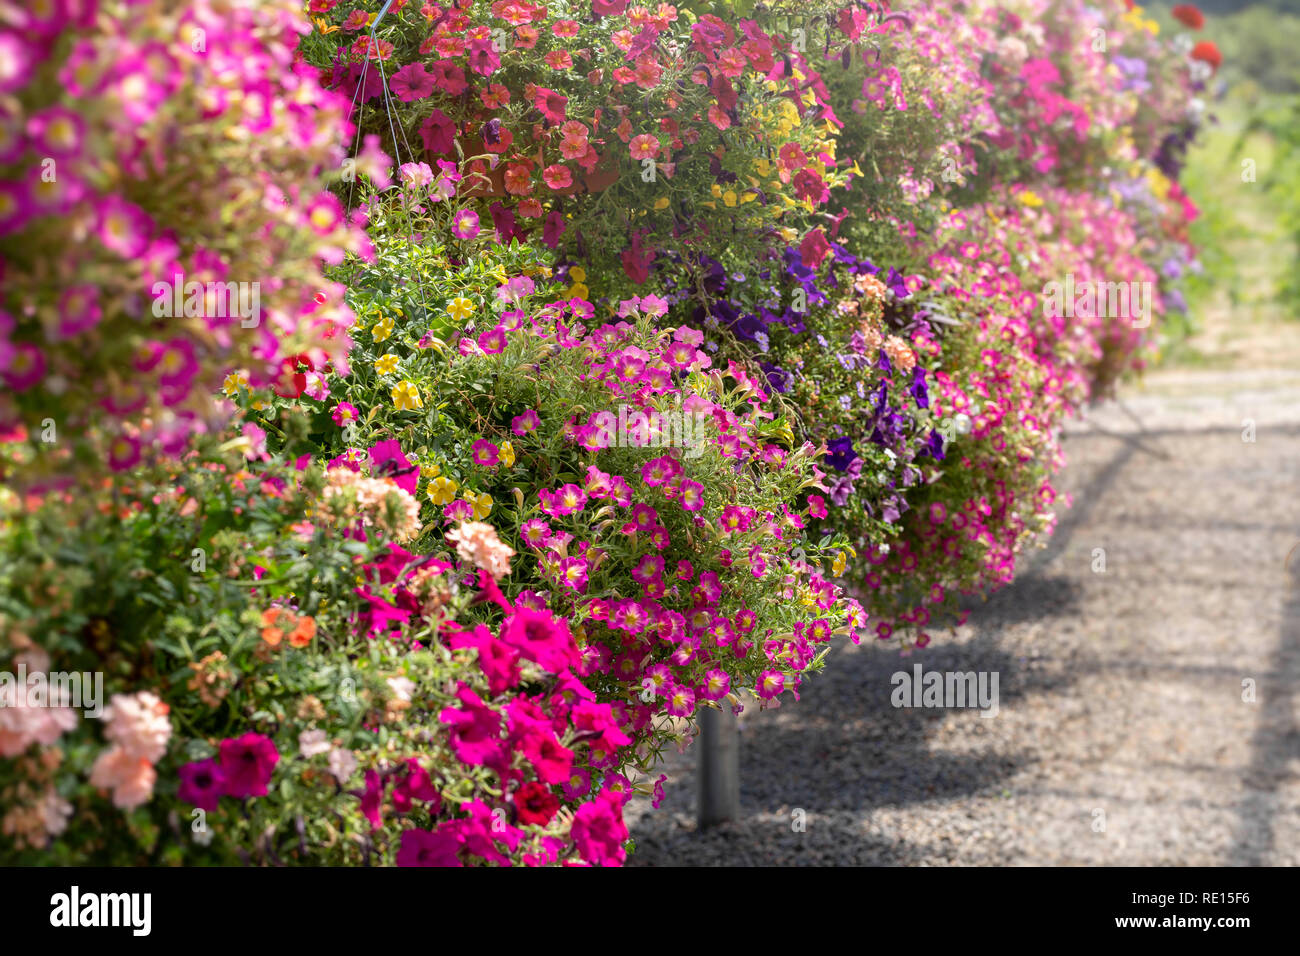 Flower baskets displayed for sale in a summertime garden center Stock Photo